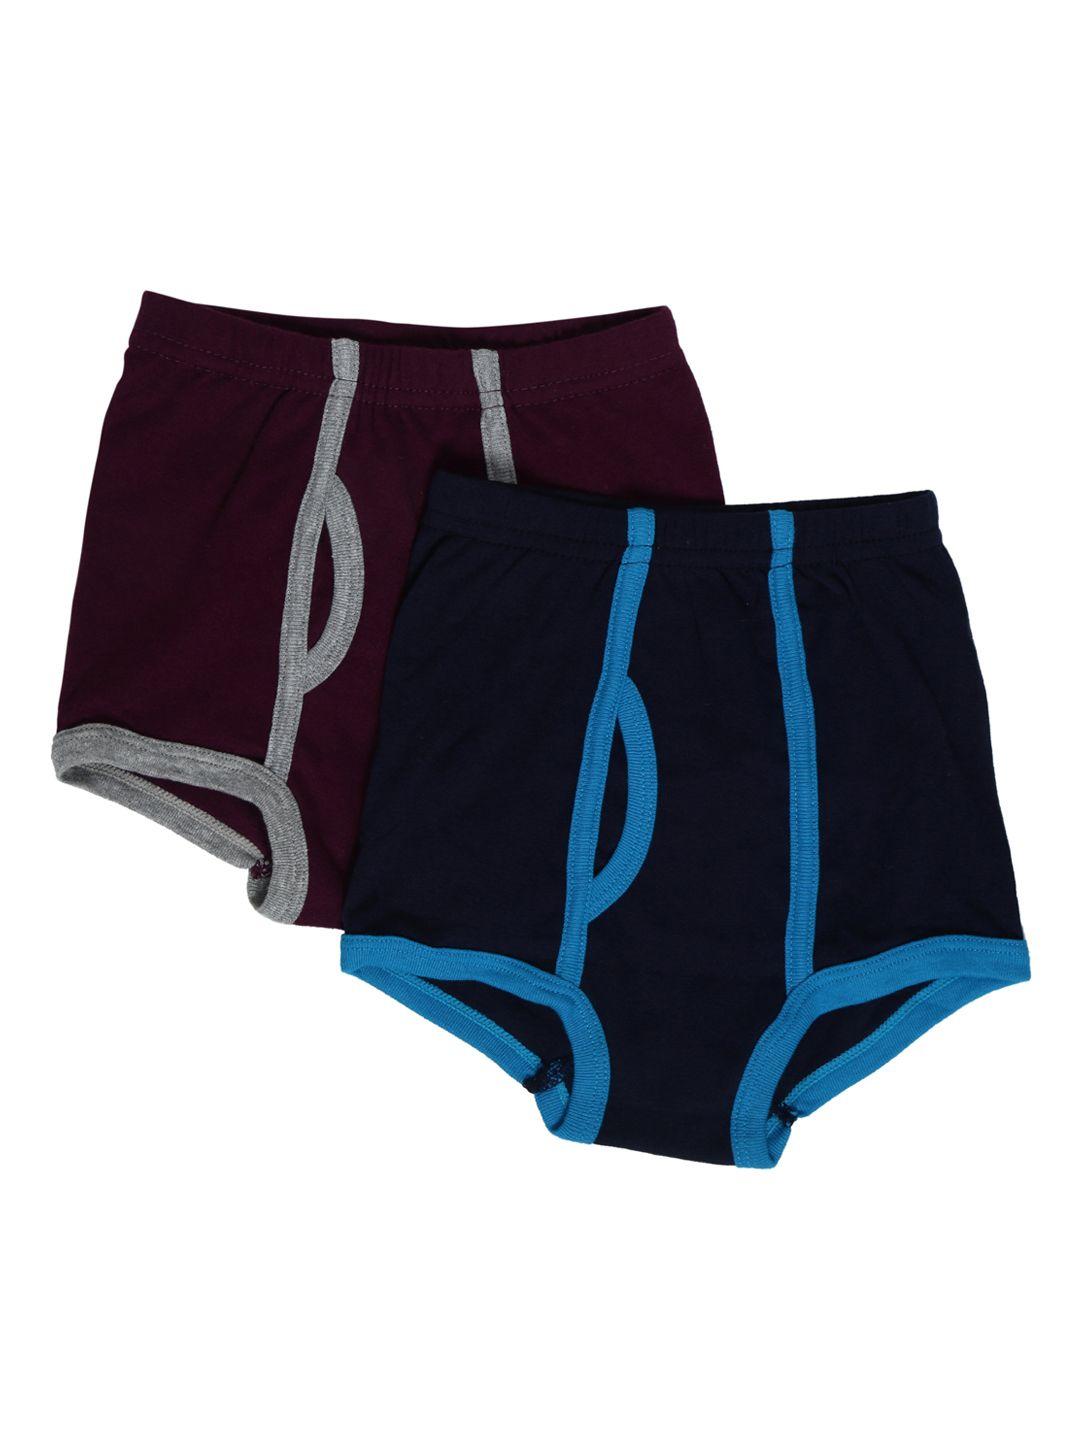 yk boys pack of 2 assorted boy shorts